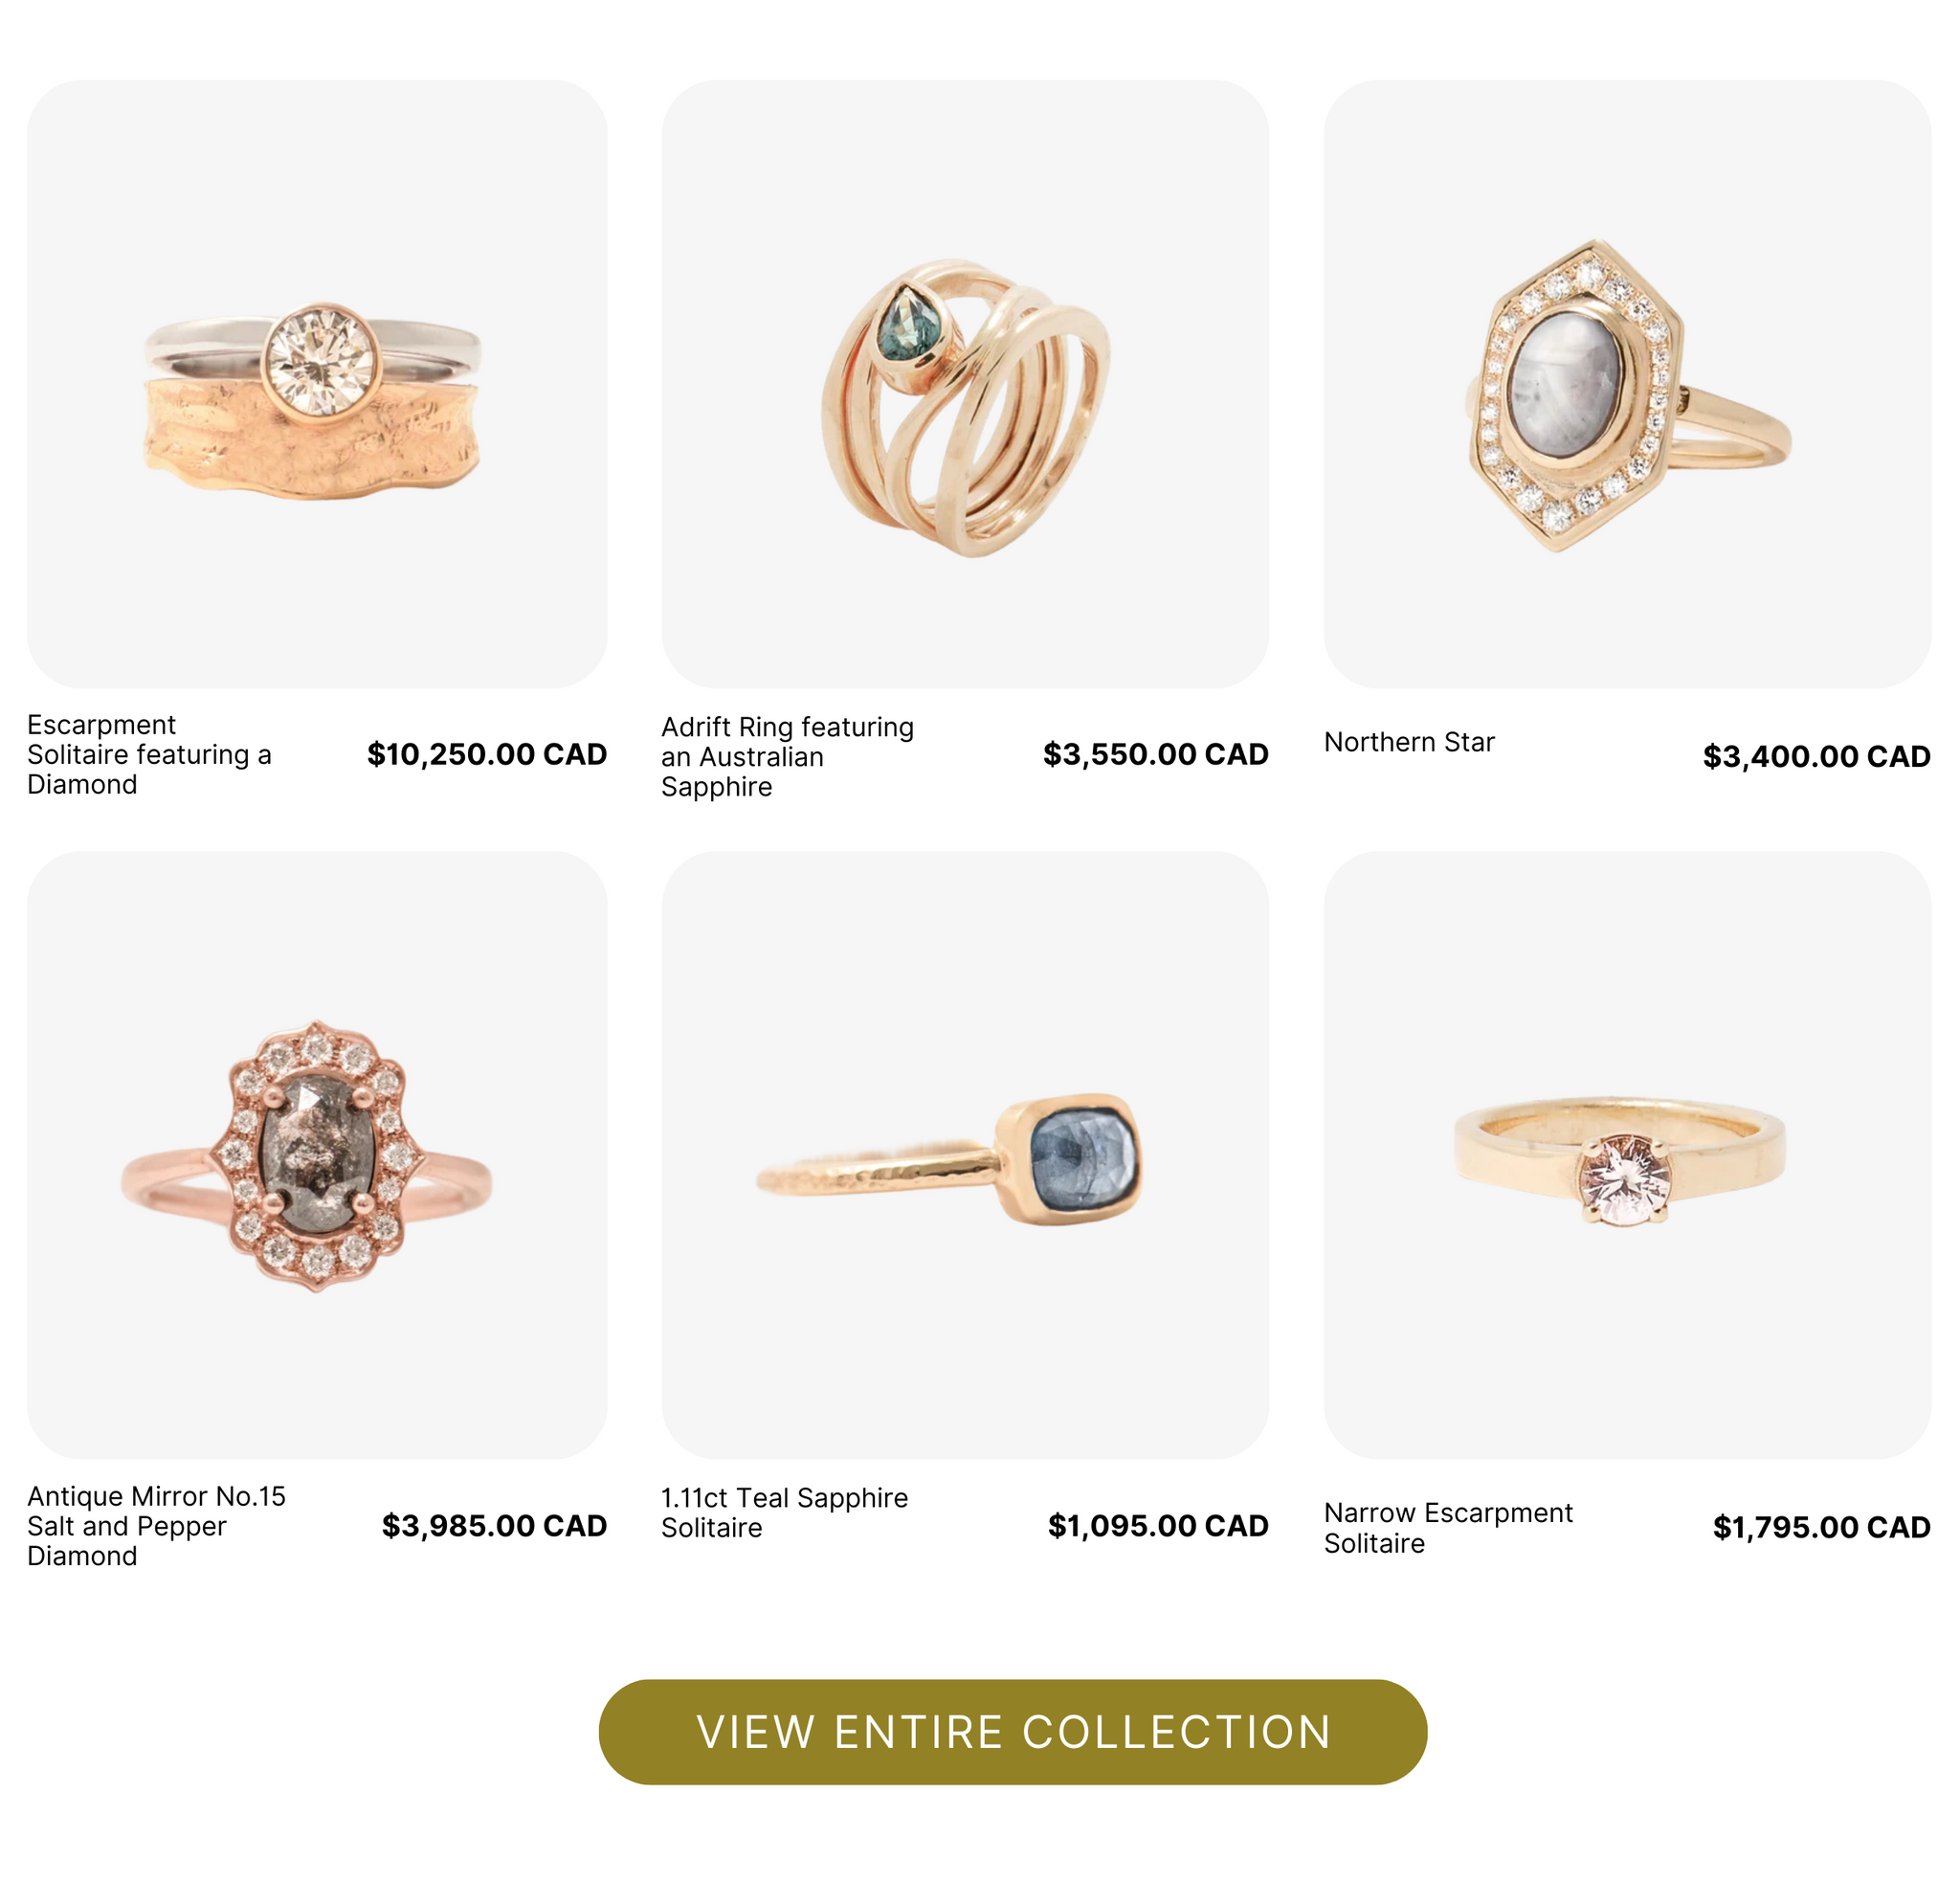 The ultimate guide to different types of rings